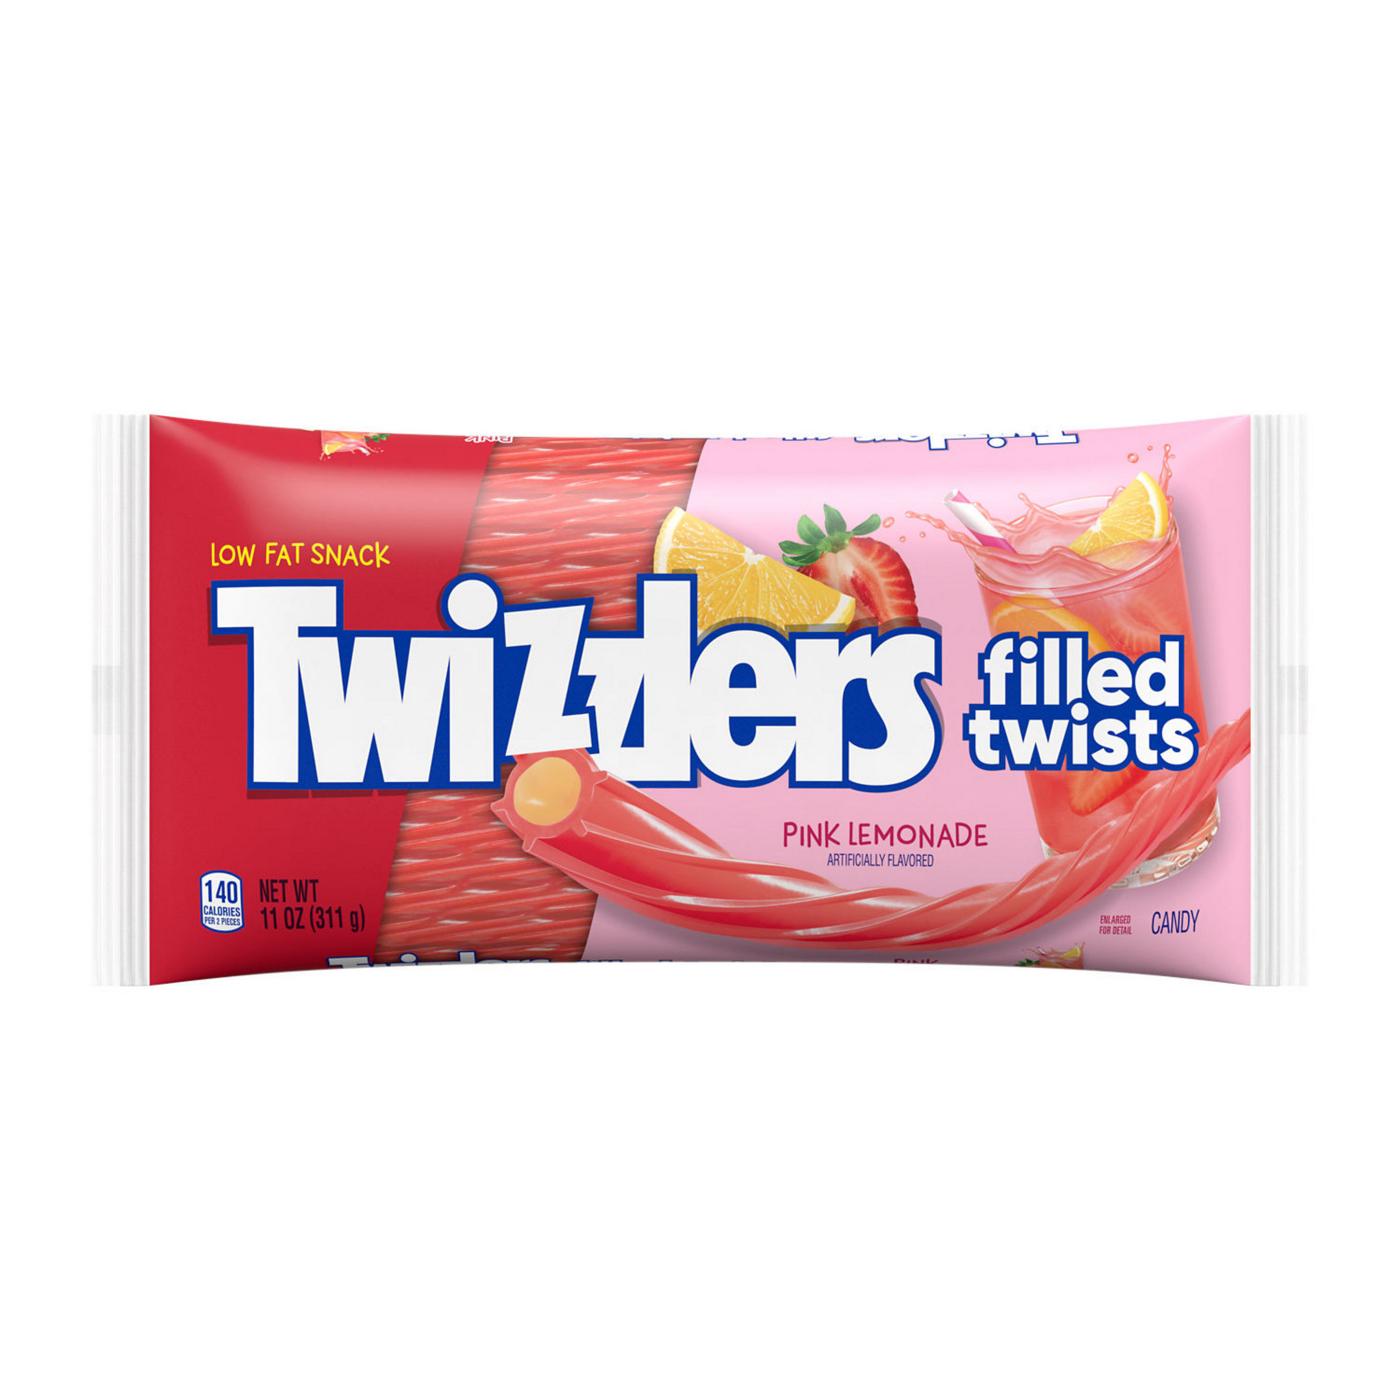 Twizzlers Filled Twists Pink Lemonade Licorice Candy; image 1 of 4